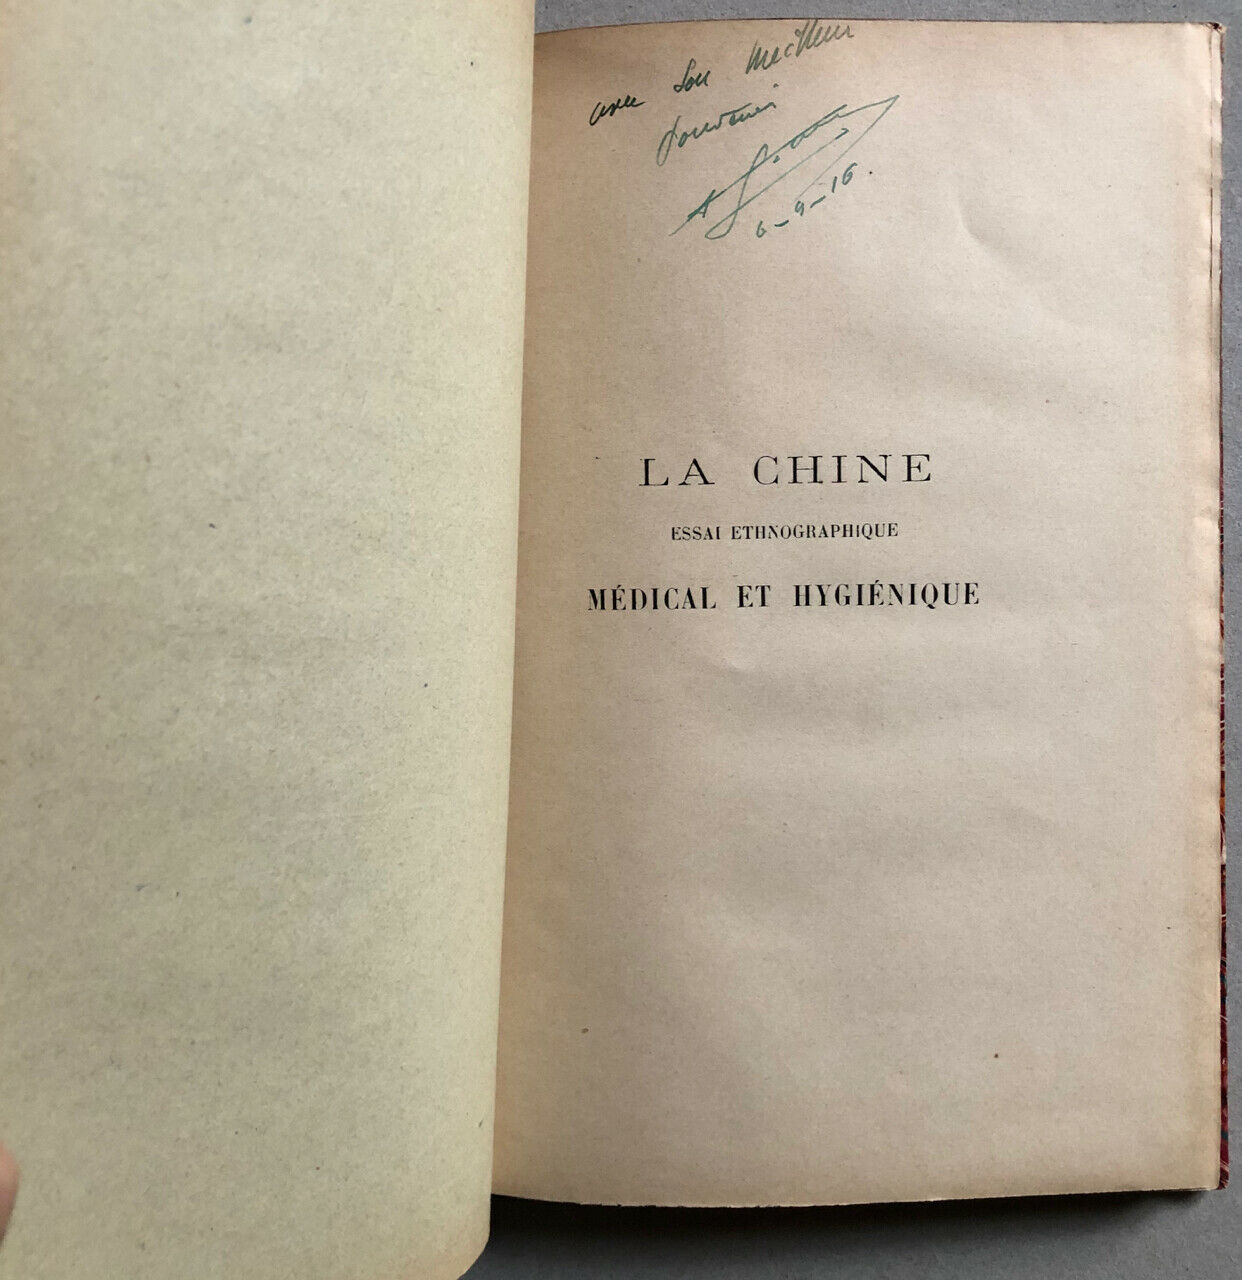 Dr Le Tellier — China — ethnographic essay — 4 pl. ht — Bailliere — 1899.